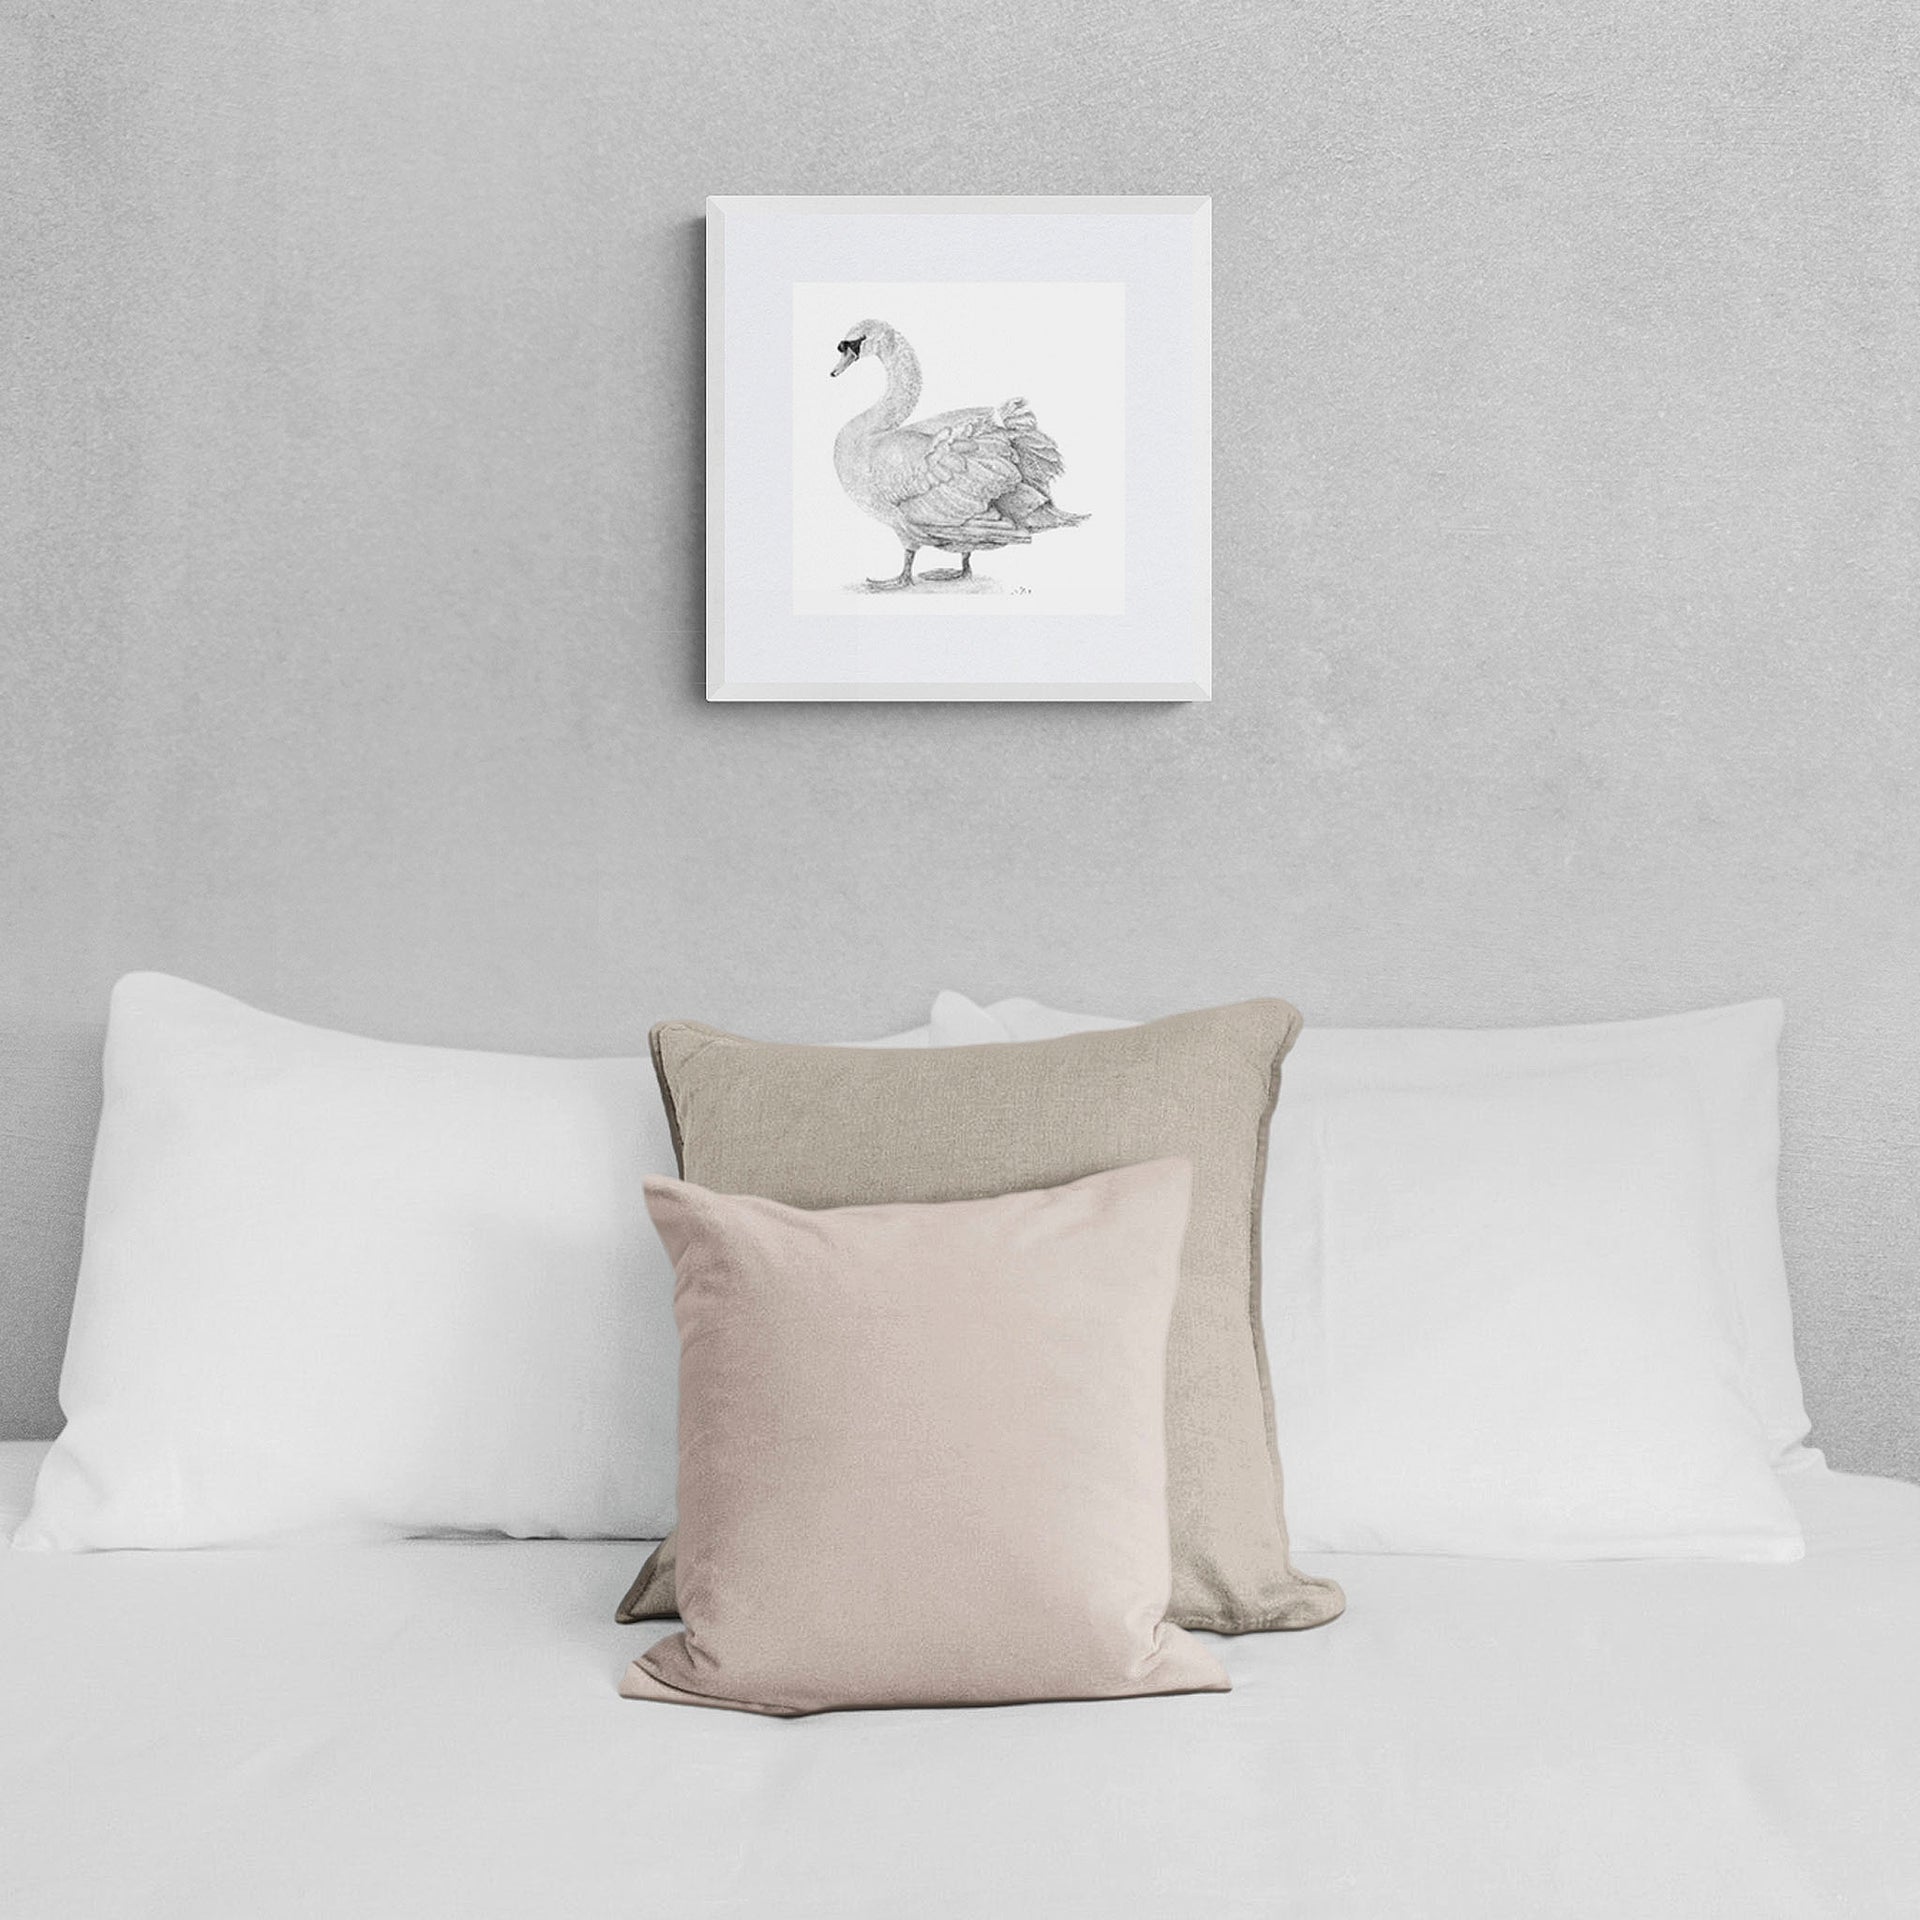 Giclée Print of Hyde Swan Pencil Drawing in frame on the wall